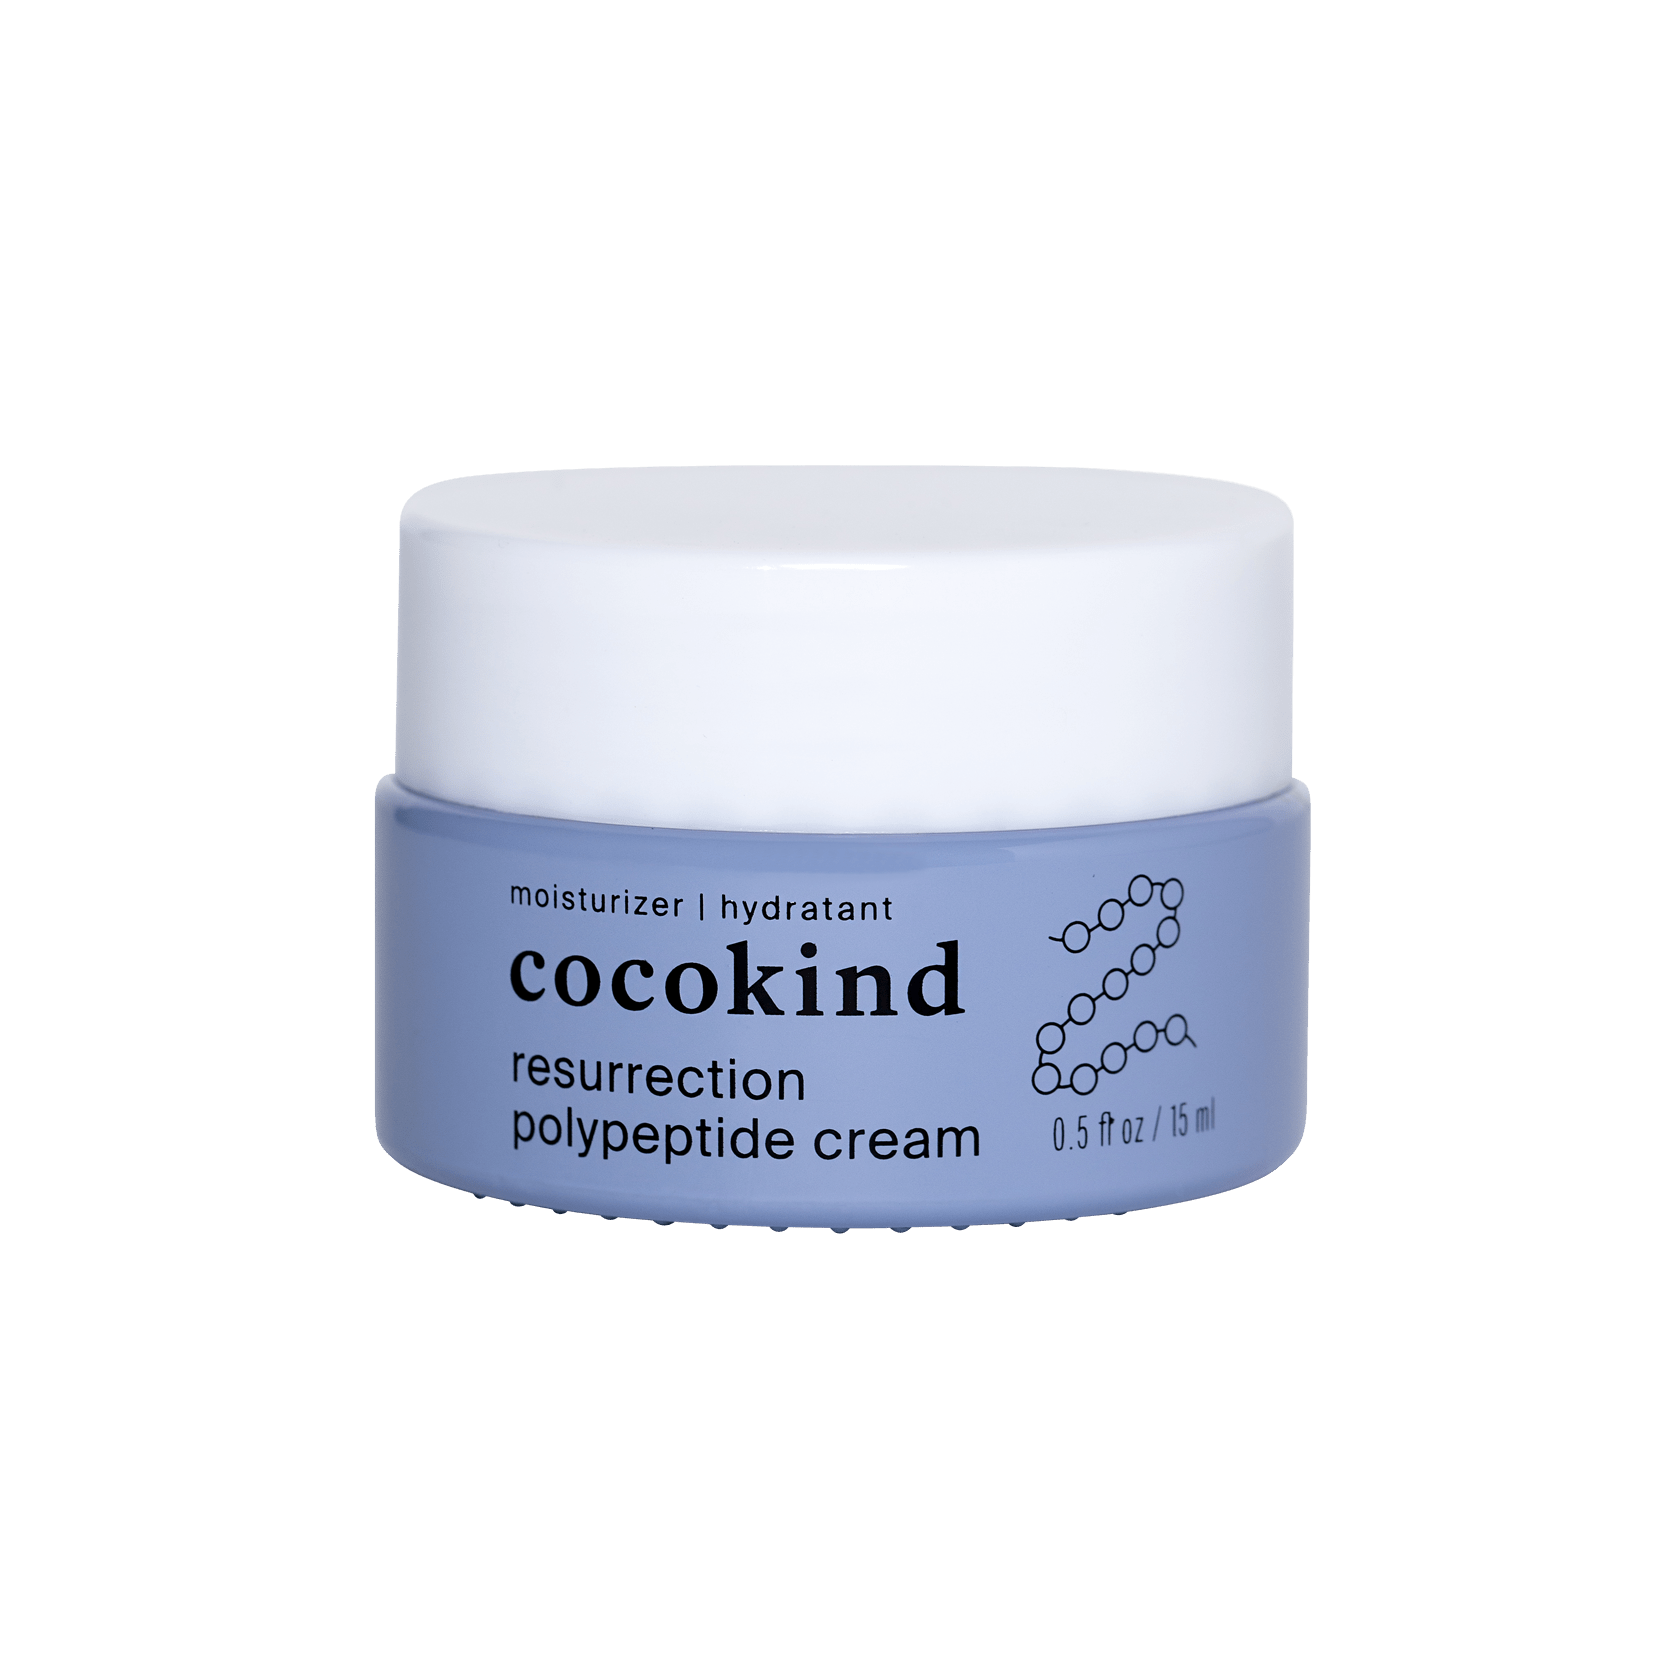 travel-size resurrection polypeptide cream gift - cocokind